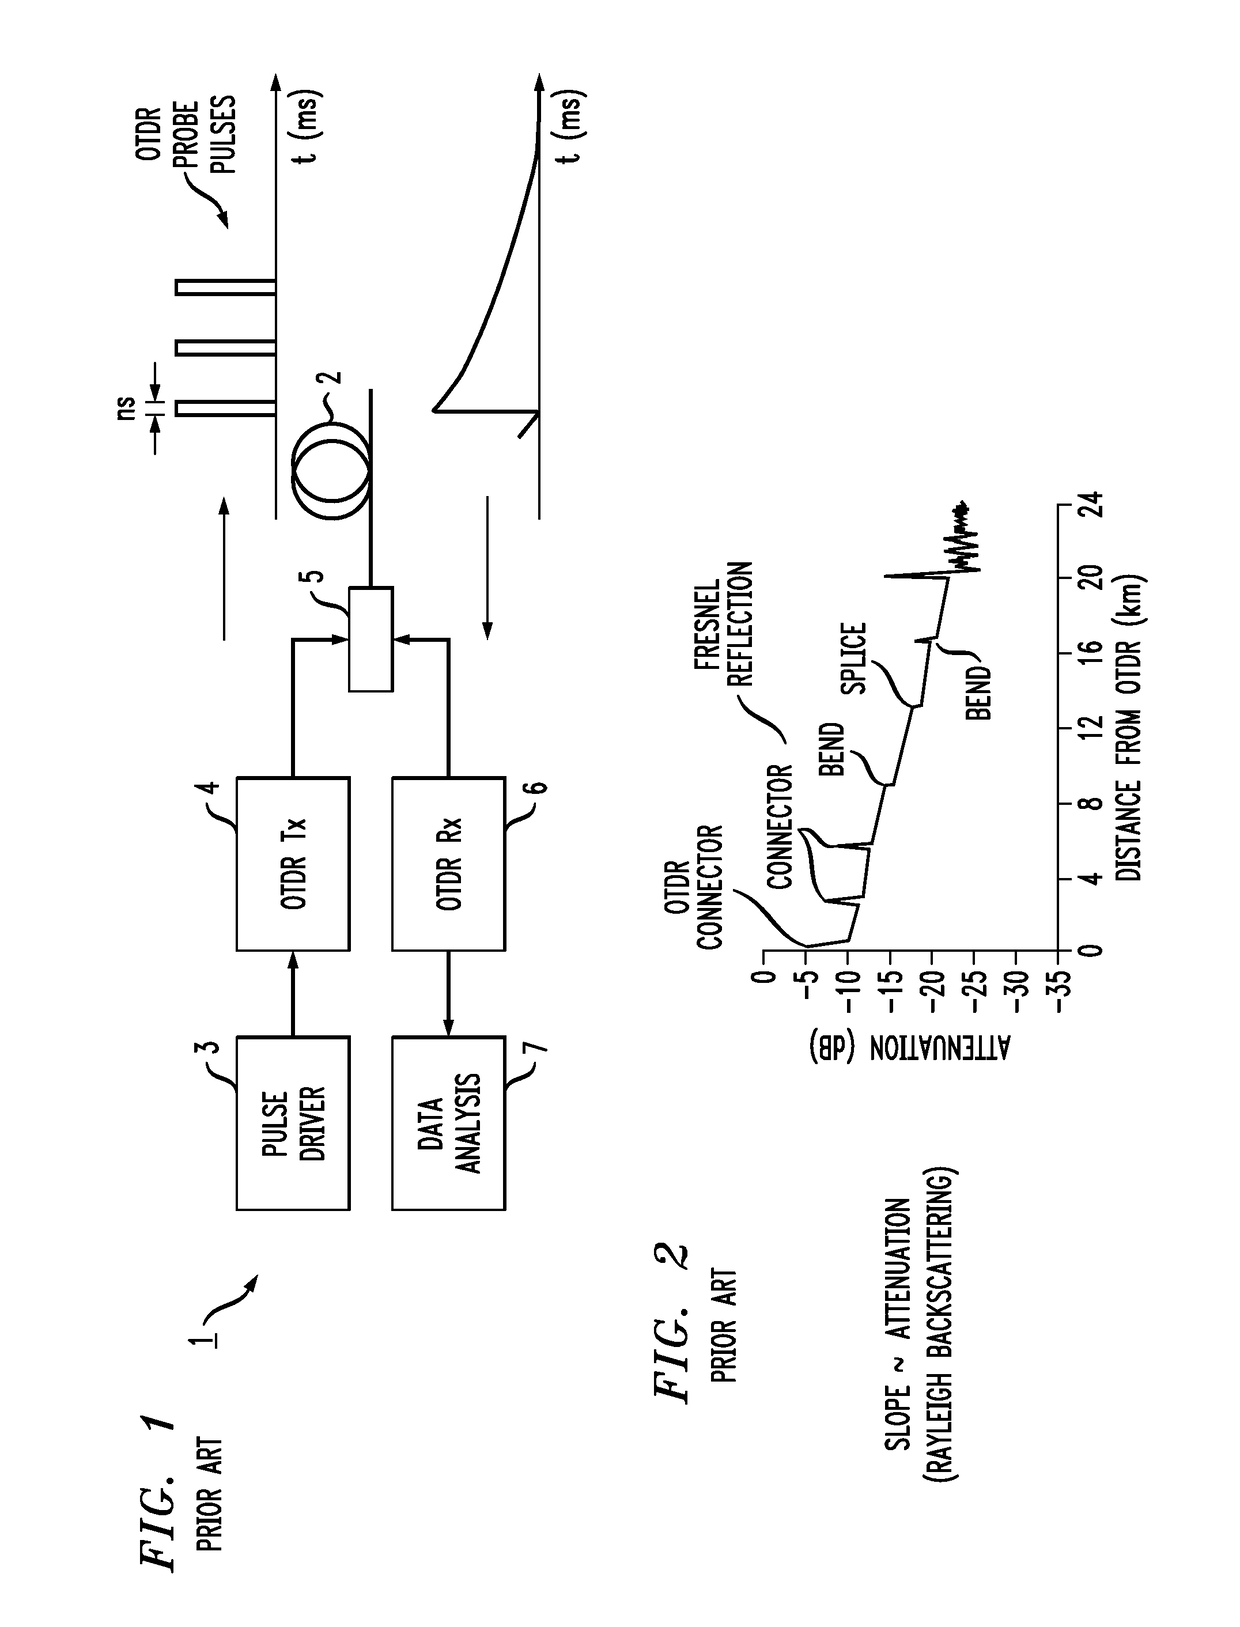 Edge propagating optical time domain reflectometer and method of using the same